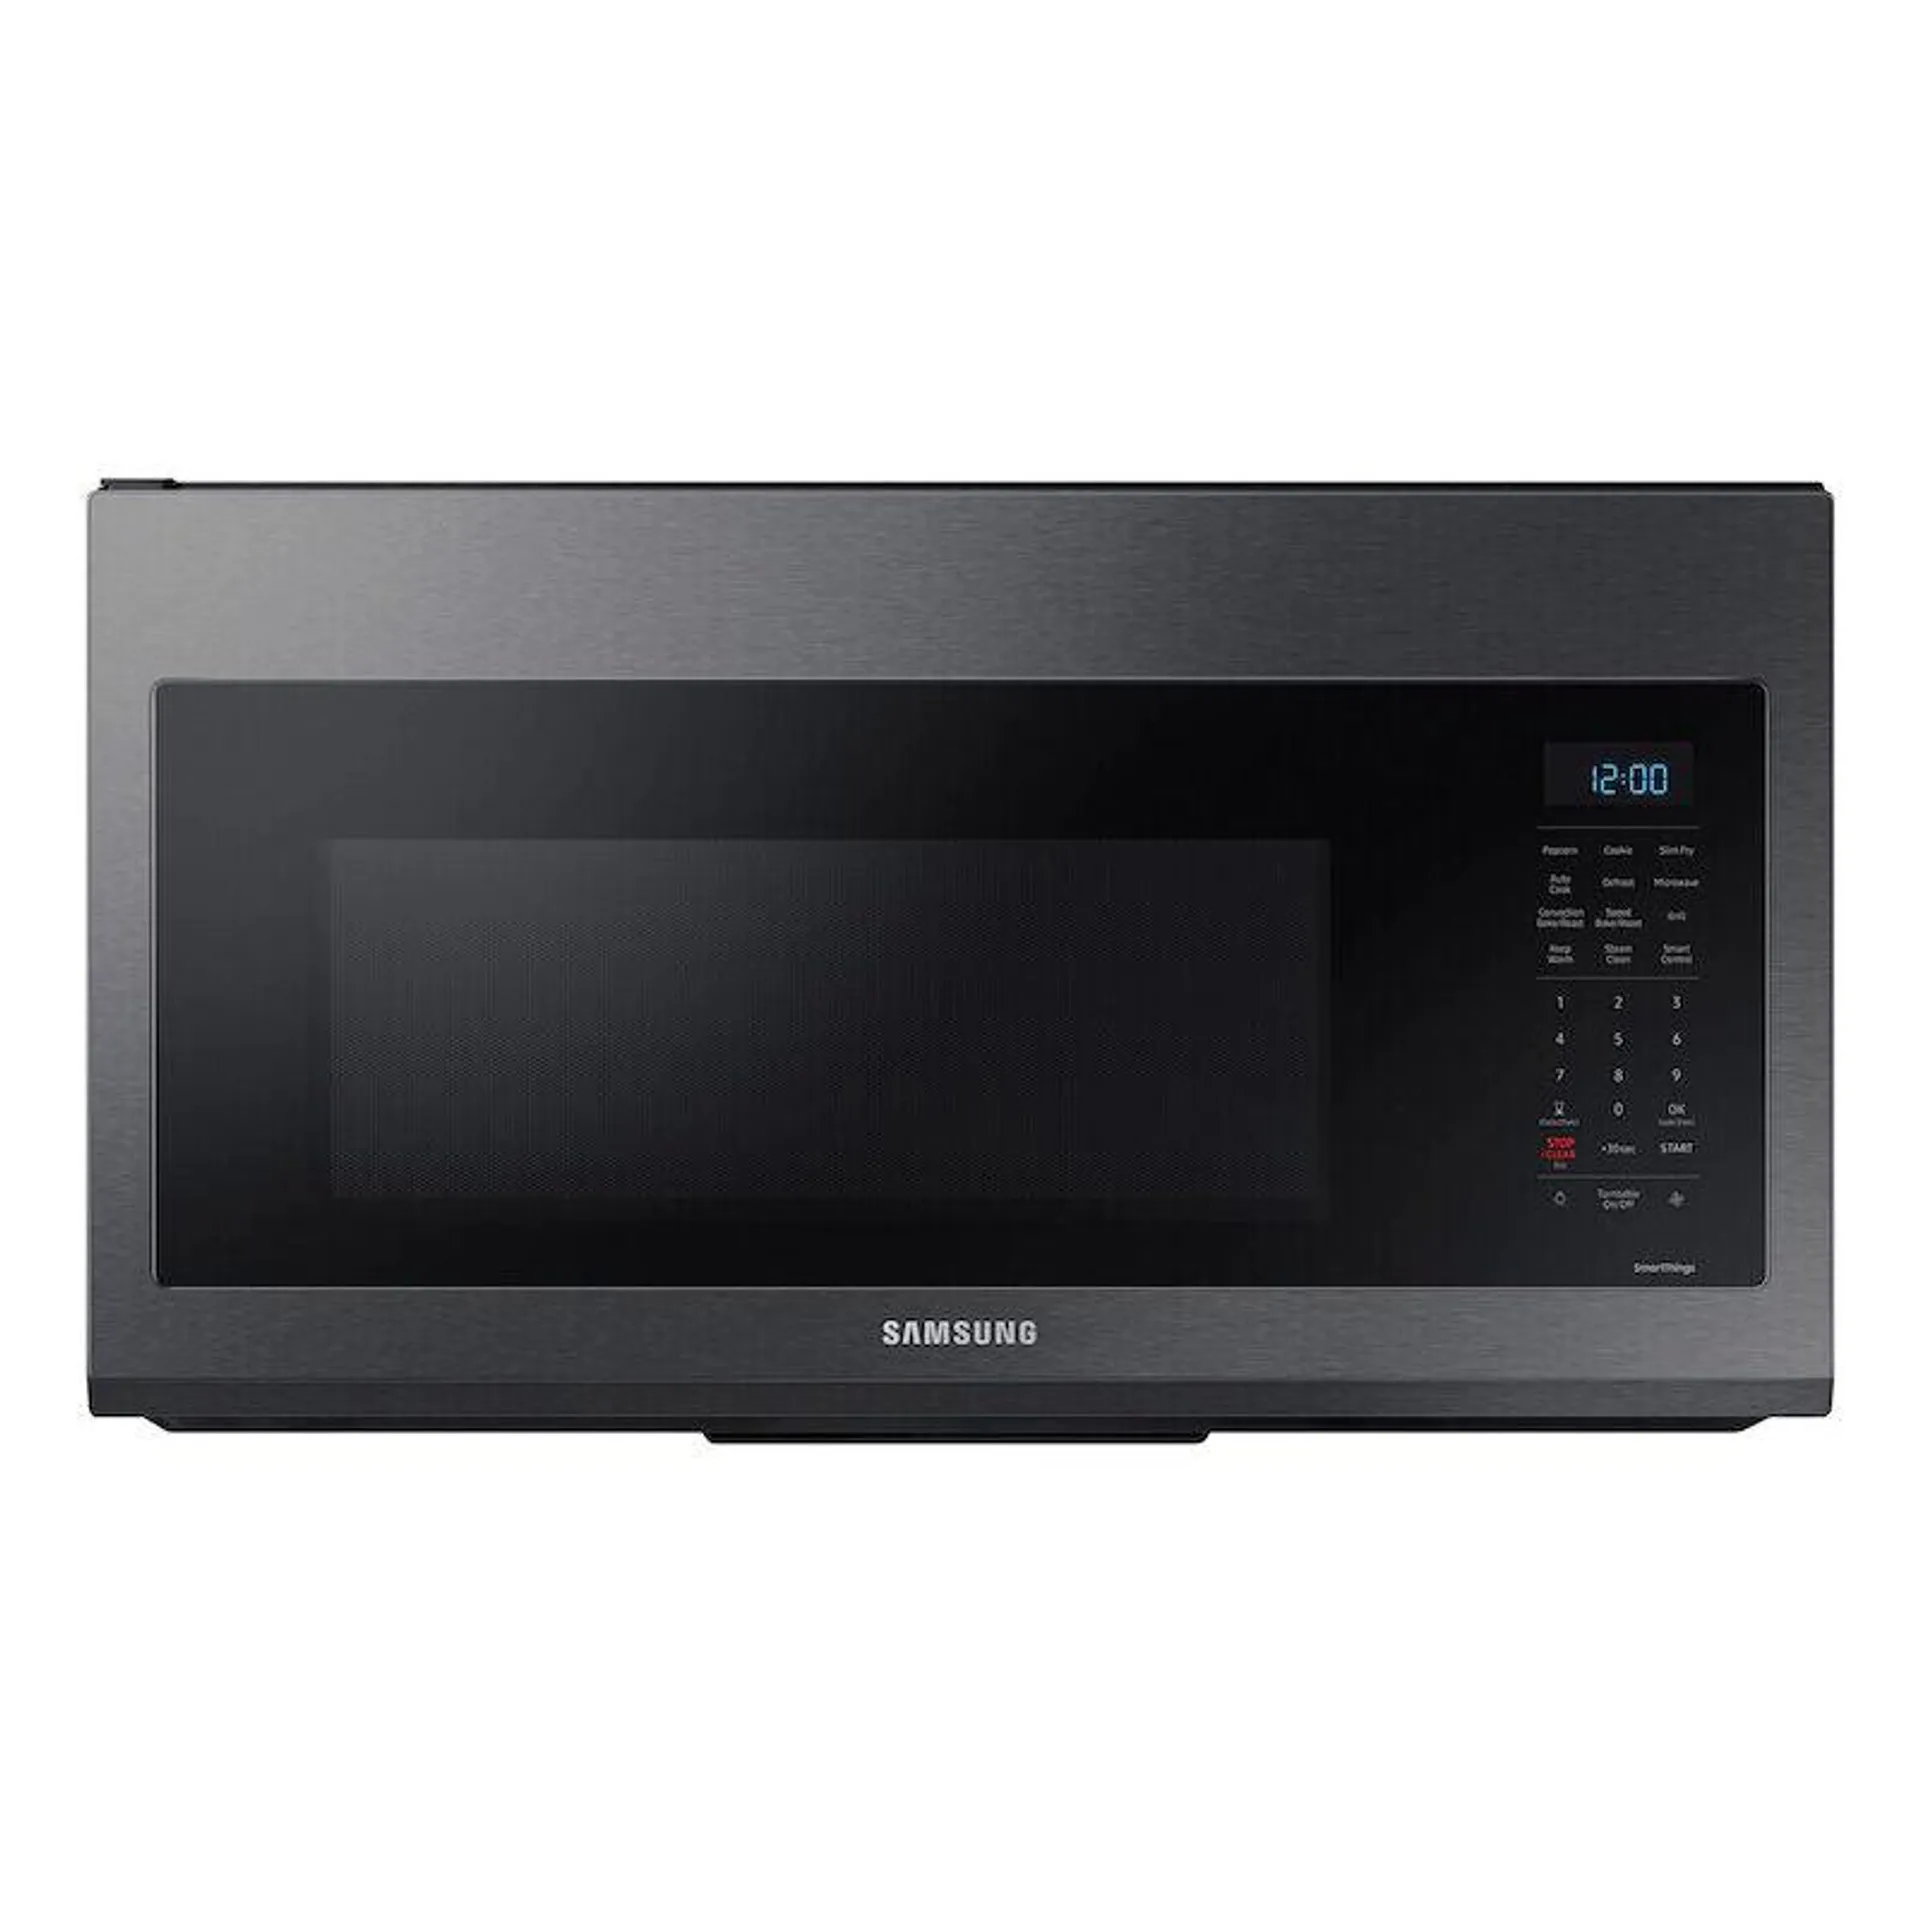 Samsung 30" 1.7 Cu. Ft. Over-the-Range Microwave with 10 Power Levels, 300 CFM & Sensor Cooking Controls - Black Stainless Steel